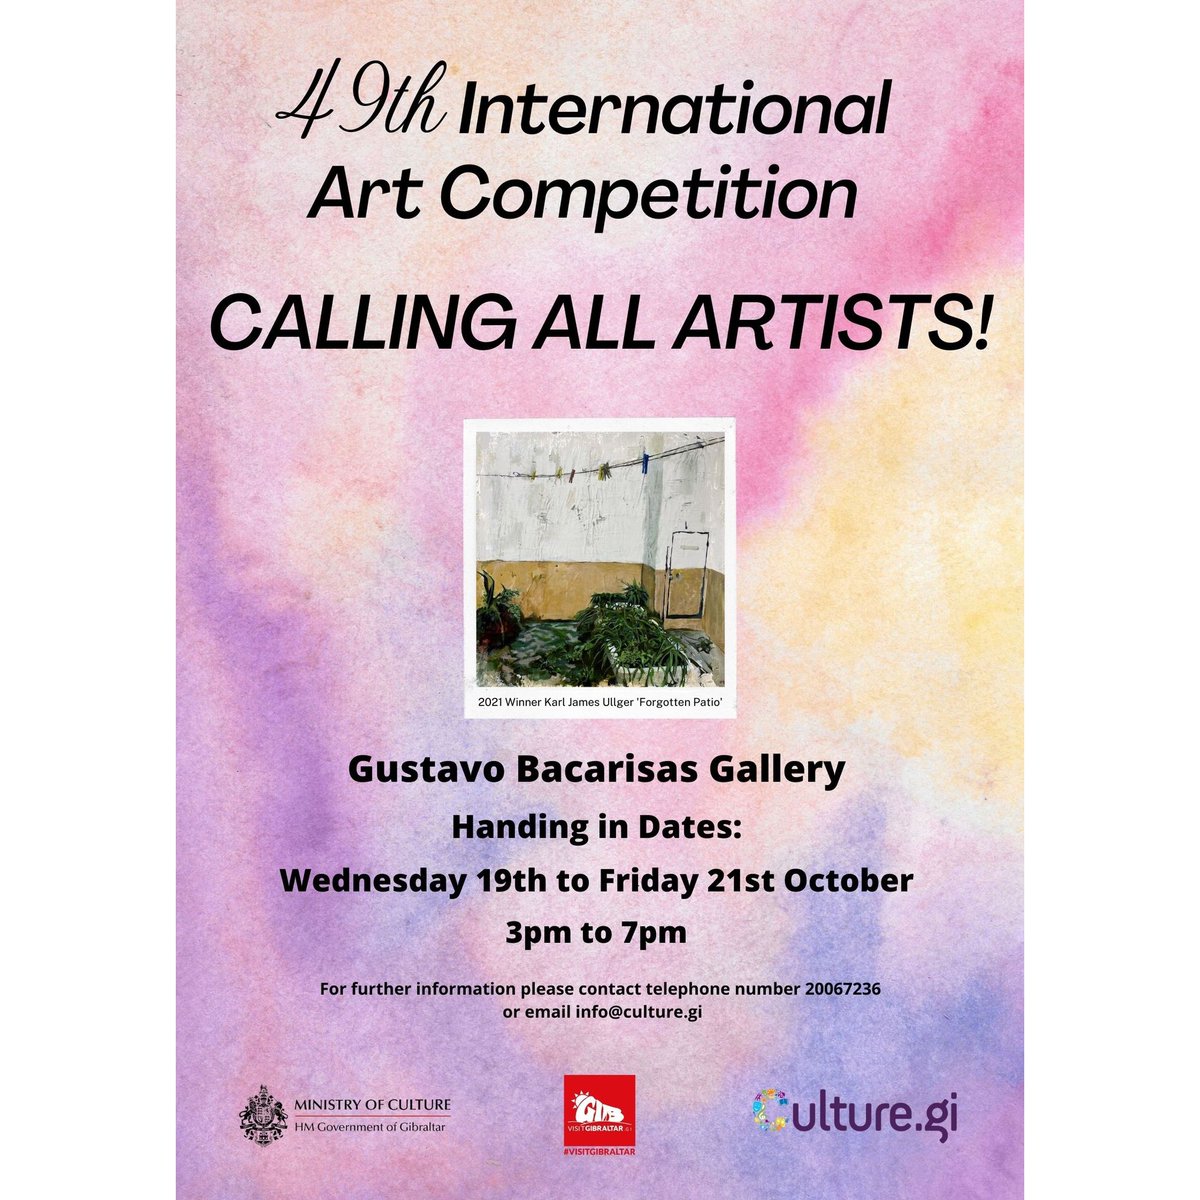 International Art Competition - HANDING IN BEGINS TOMORROW! Gustavo Bacarisas Gallery from 3pm to 7pm Also on Thursday and Friday at the same times #InternationalArt #Art #Competition #GCS #GibCulture #VisitGibraltar